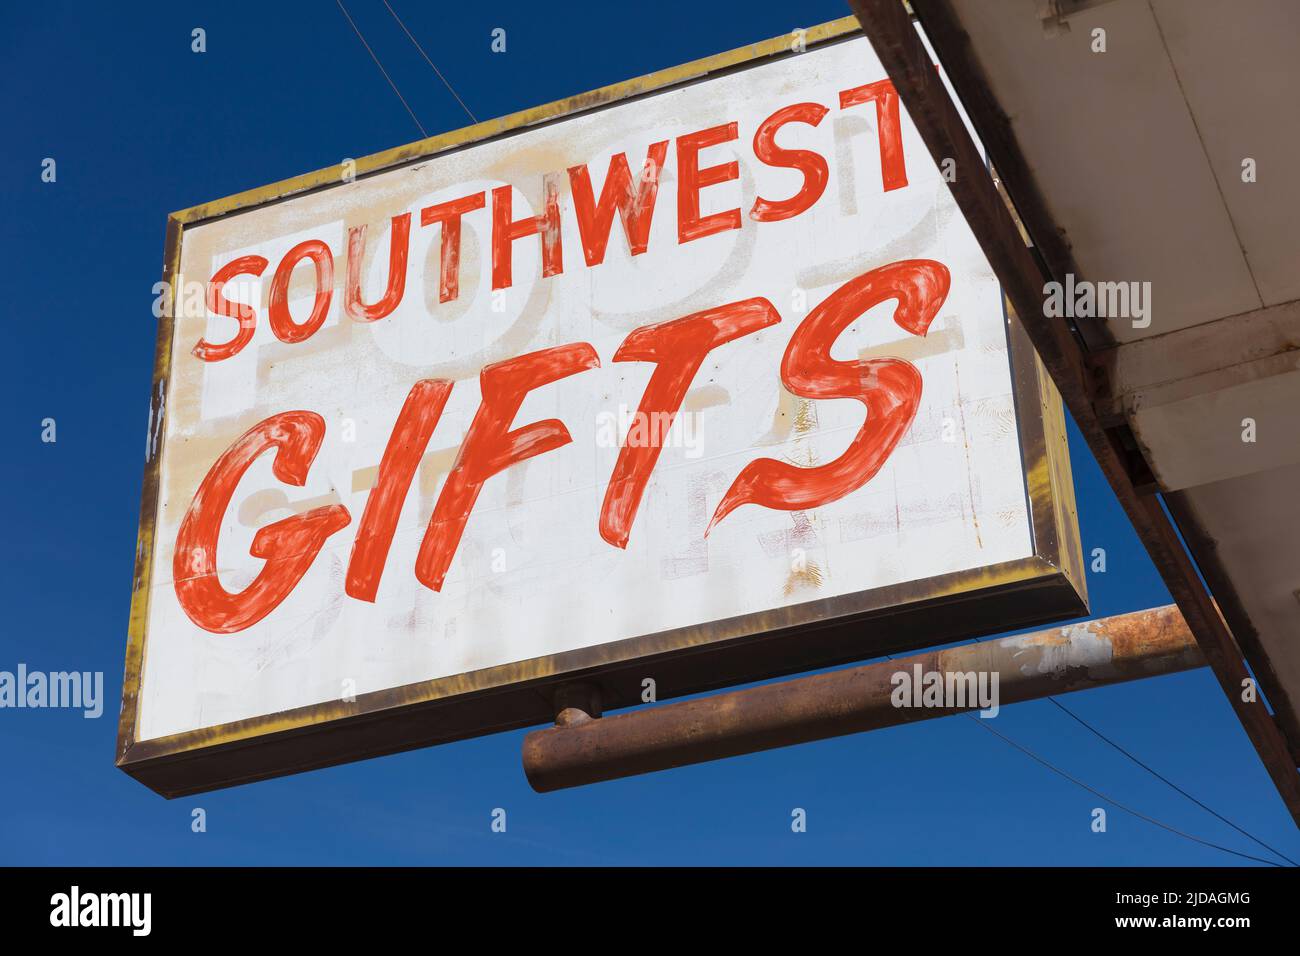 Sign advertising Southwest Gifts. Stock Photo